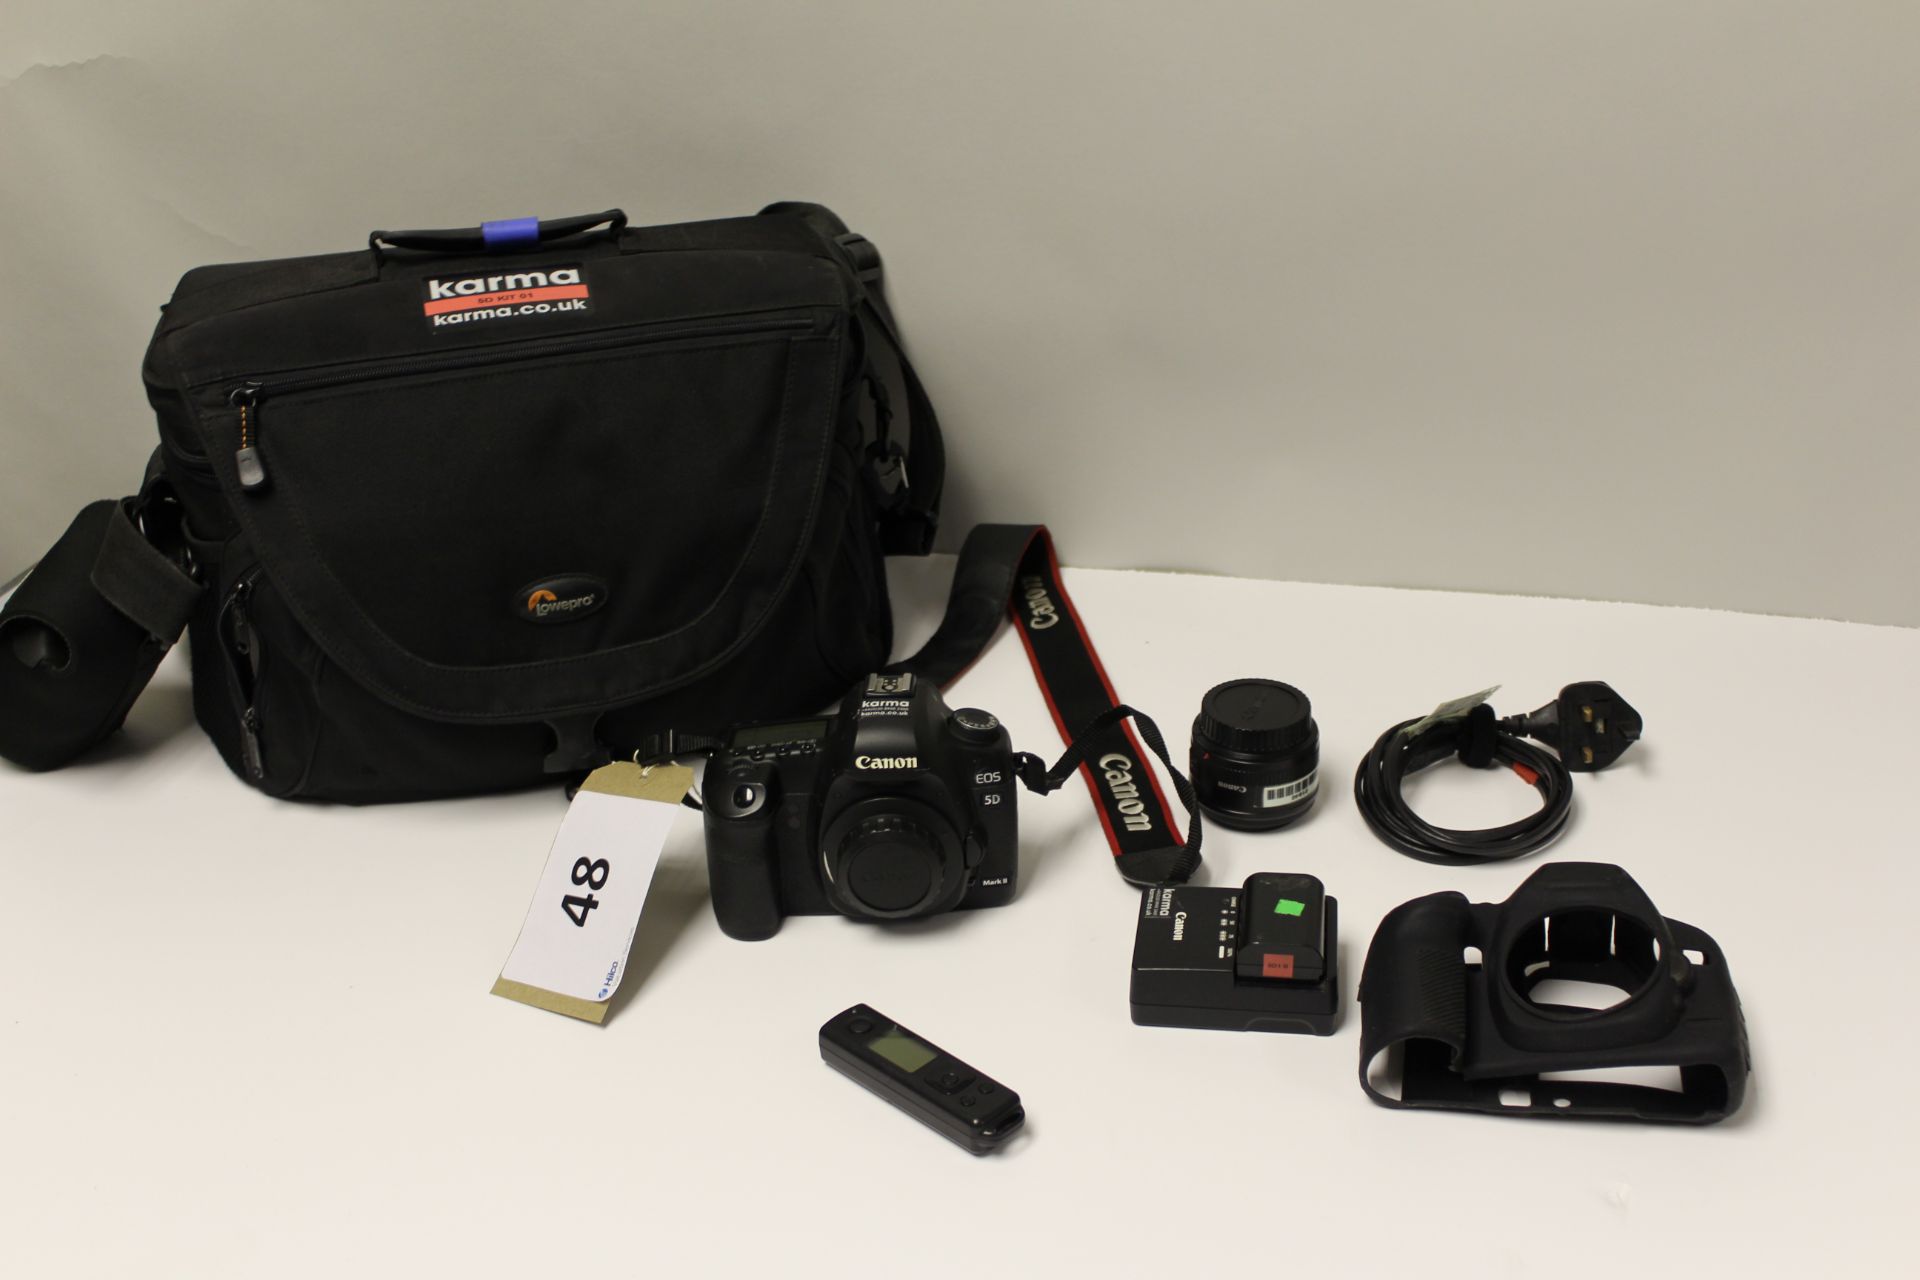 Canon EOS 5D MKII Camera Body with Assorted Accessories S/N 0730306159 - Image 2 of 2